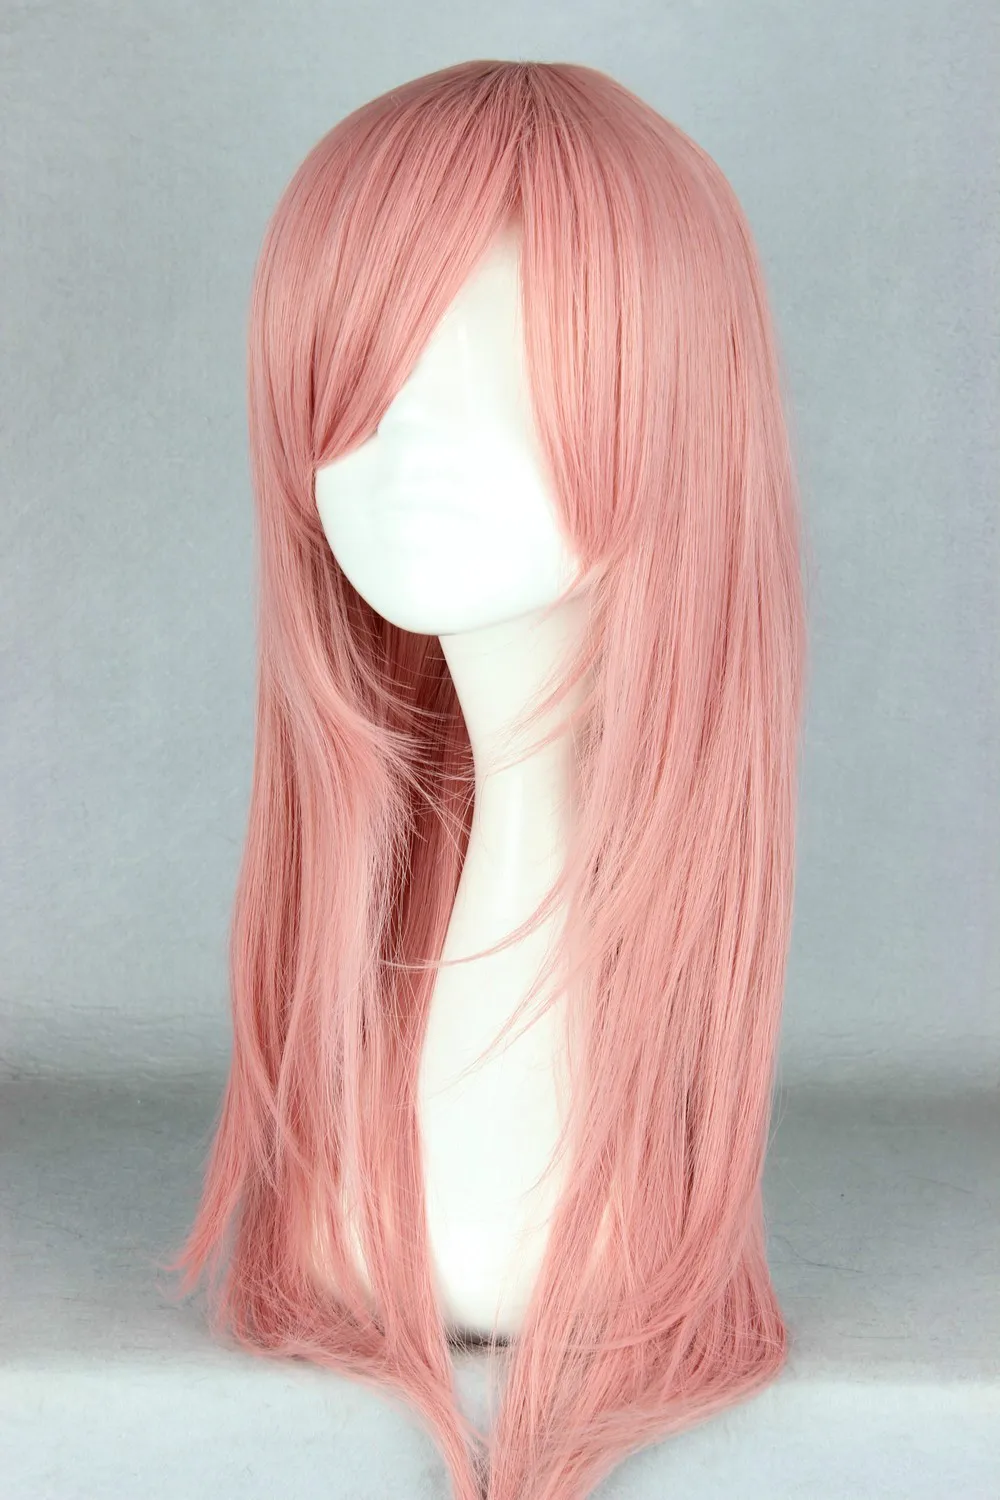 Pink Wig Fei-Show Synthetic Medium Straight Inclined Bangs Hair Heat Resistant Peruca Halloween Peruk Pelucas Cos-Play Hairpiece